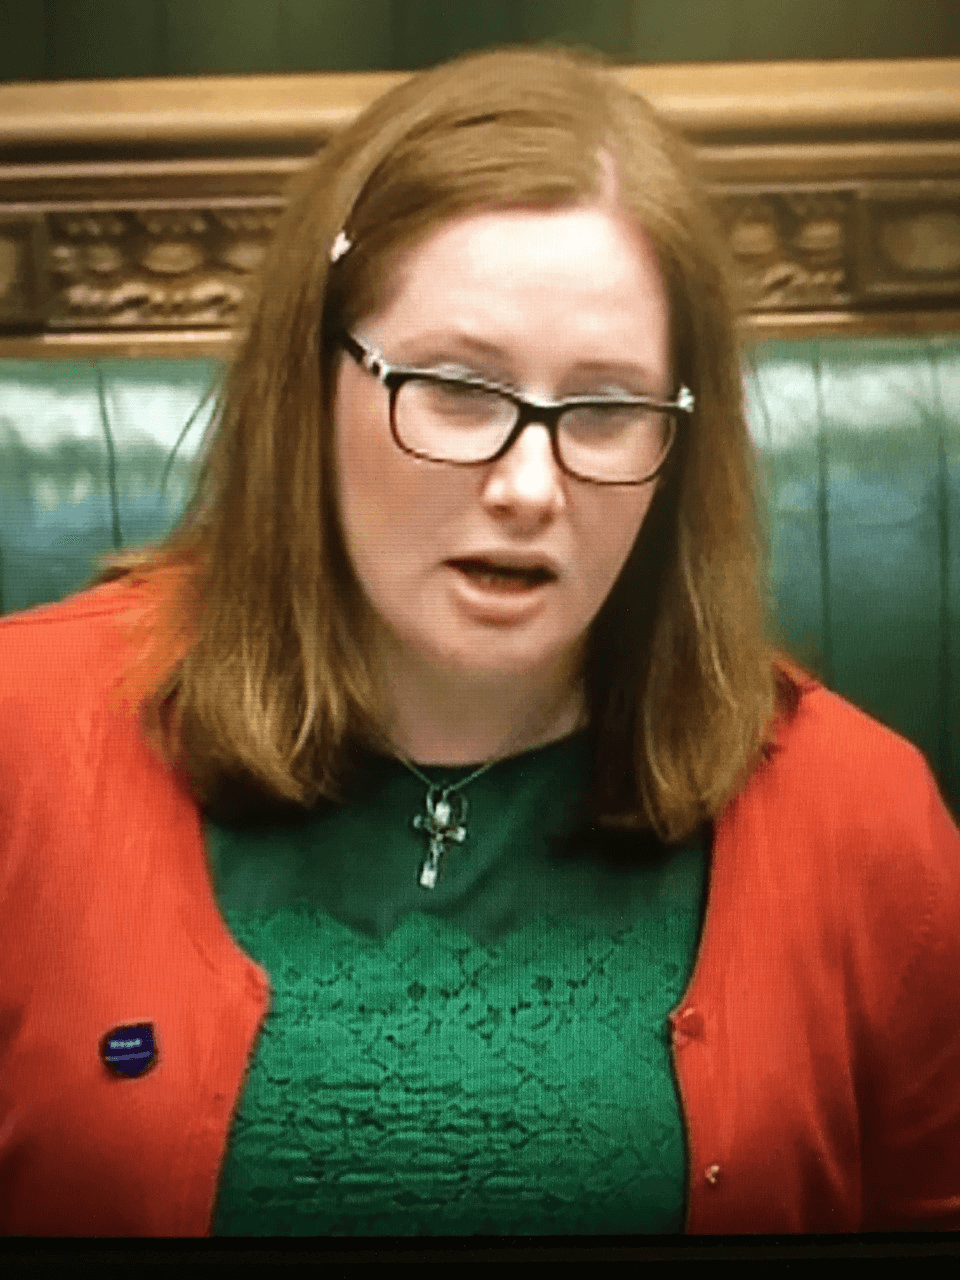 Emma’s Disappointment with Health Scrutiny